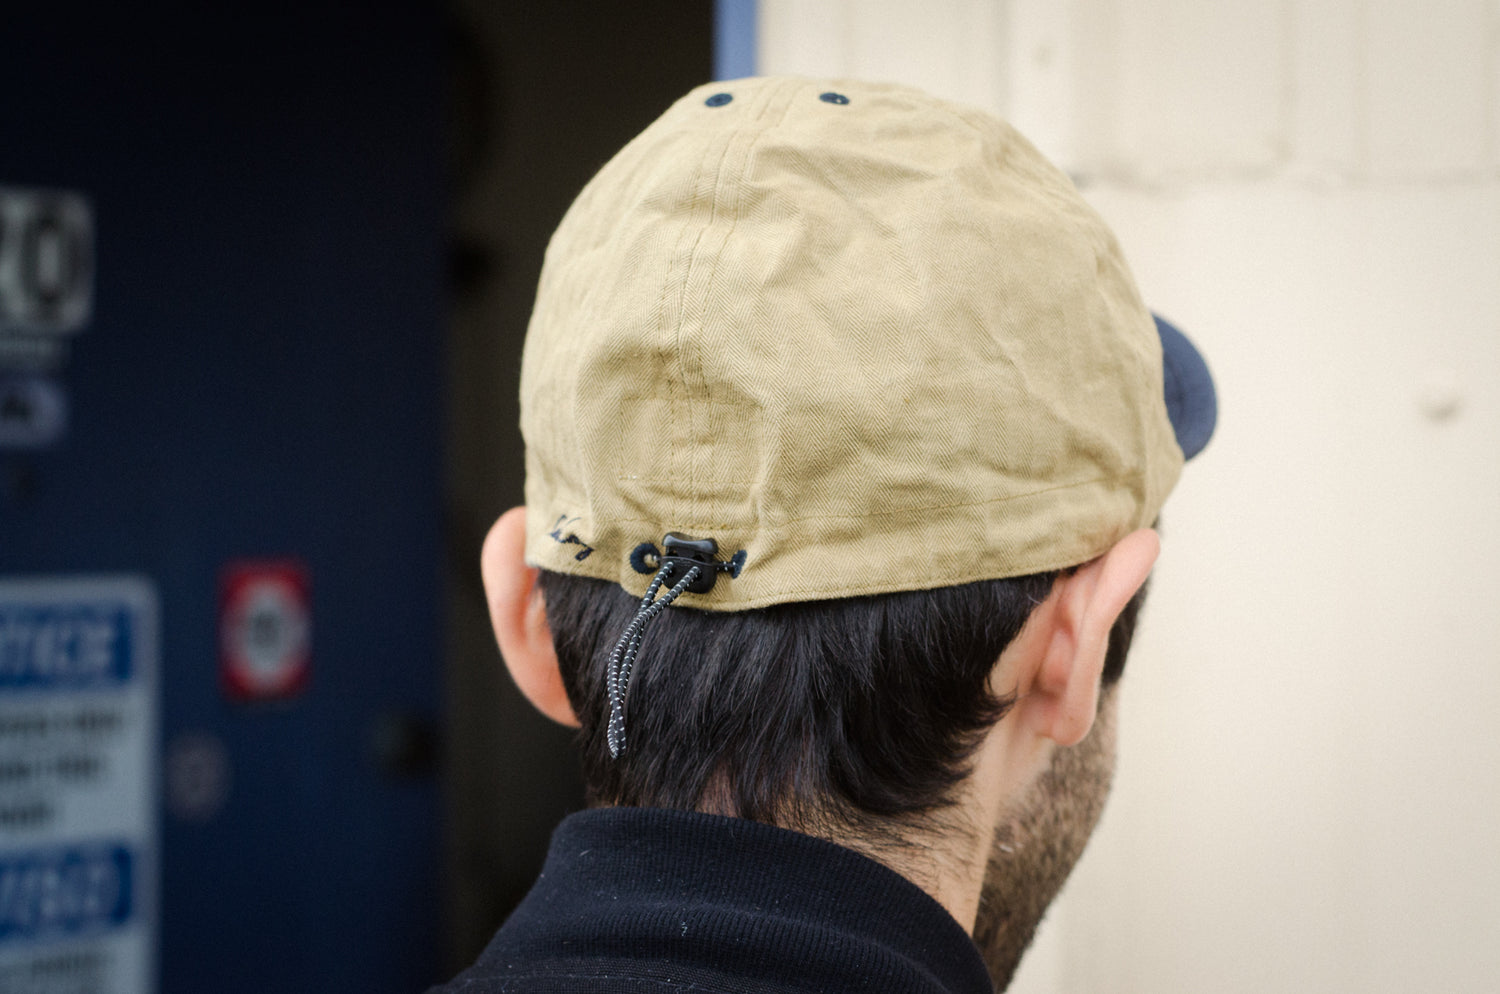 Blue Lug/RBW hats – Rivendell Bicycle Works